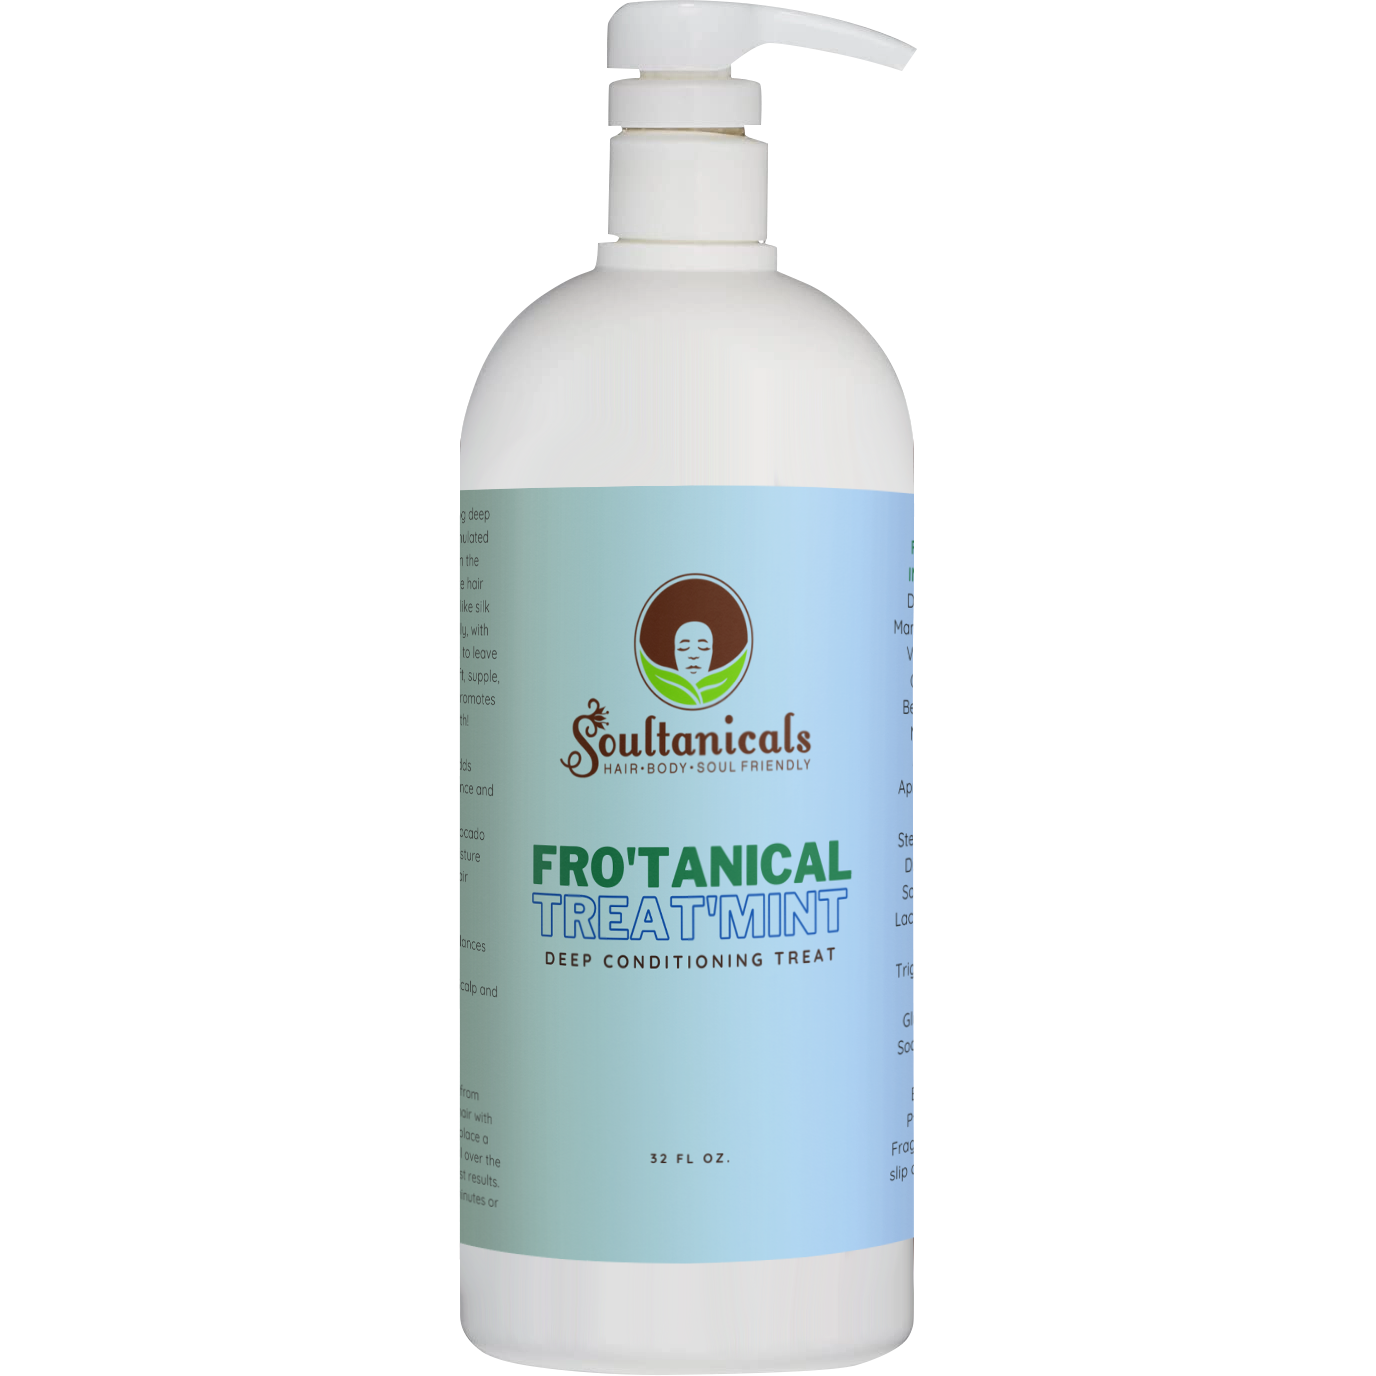 Fro'tanical Treat'Mint Deep Conditioning Treat 32 oz